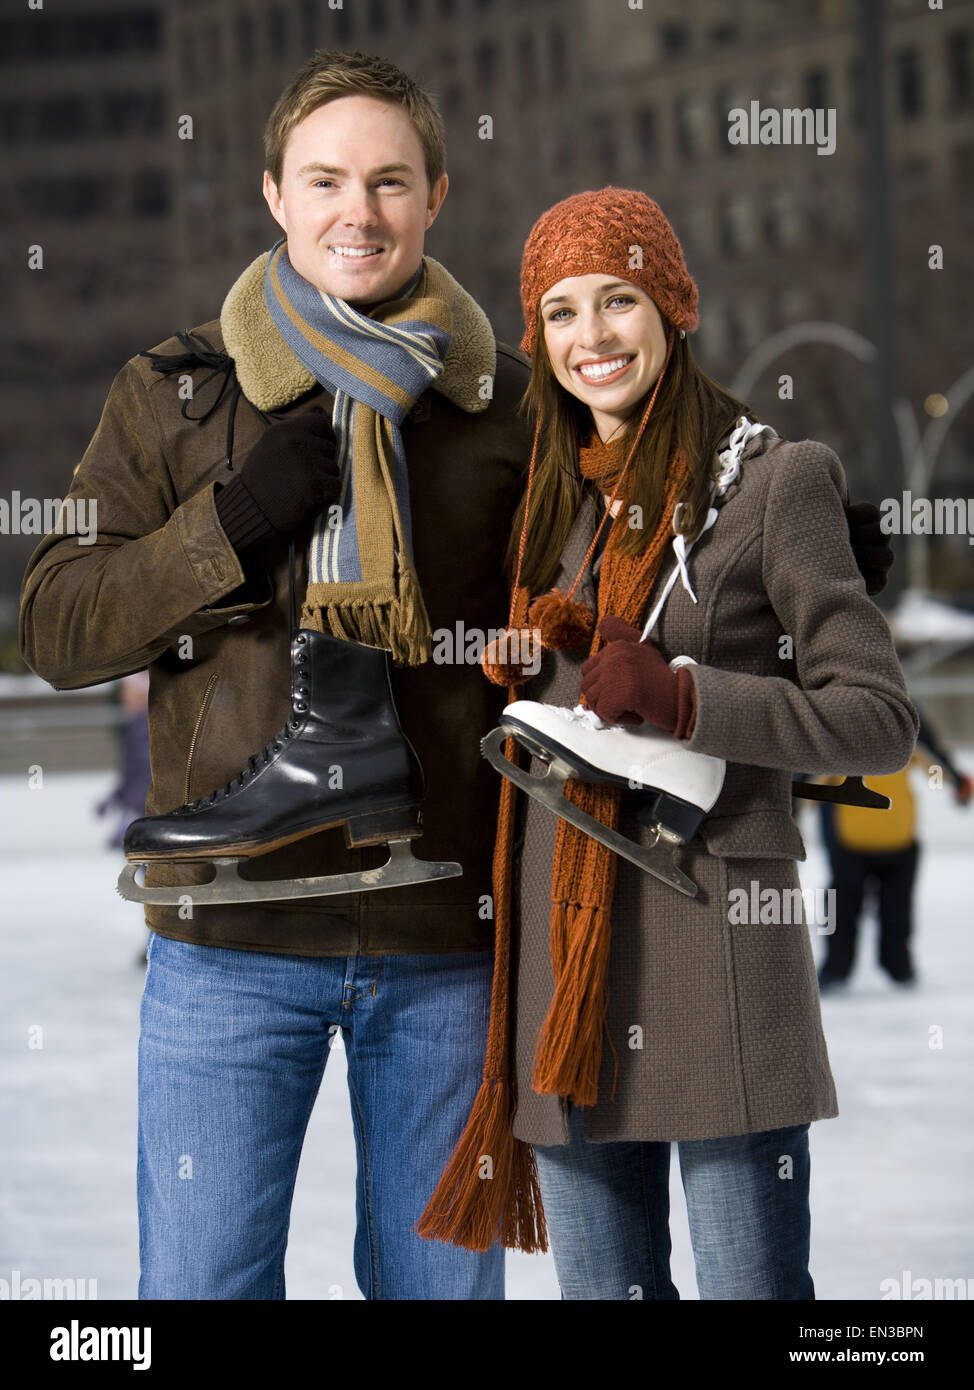 Couple with skates outdoors in winter Stock Photo